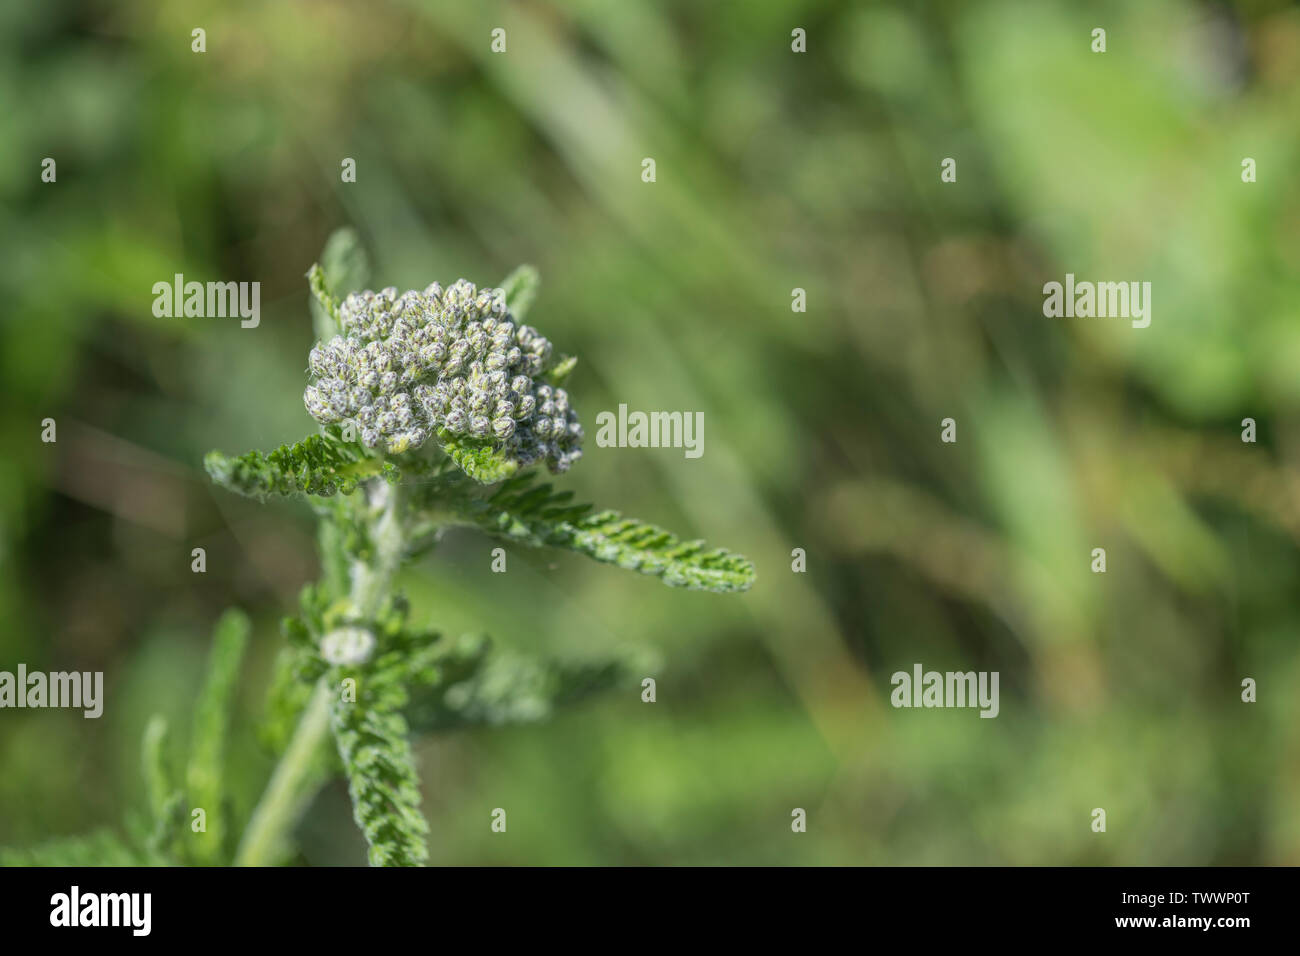 Yarrow / Achillea millefolium top with developed flower buds (June). Also called Milfoil, the plant was used as a medicinal plant in herbal remedies. Stock Photo